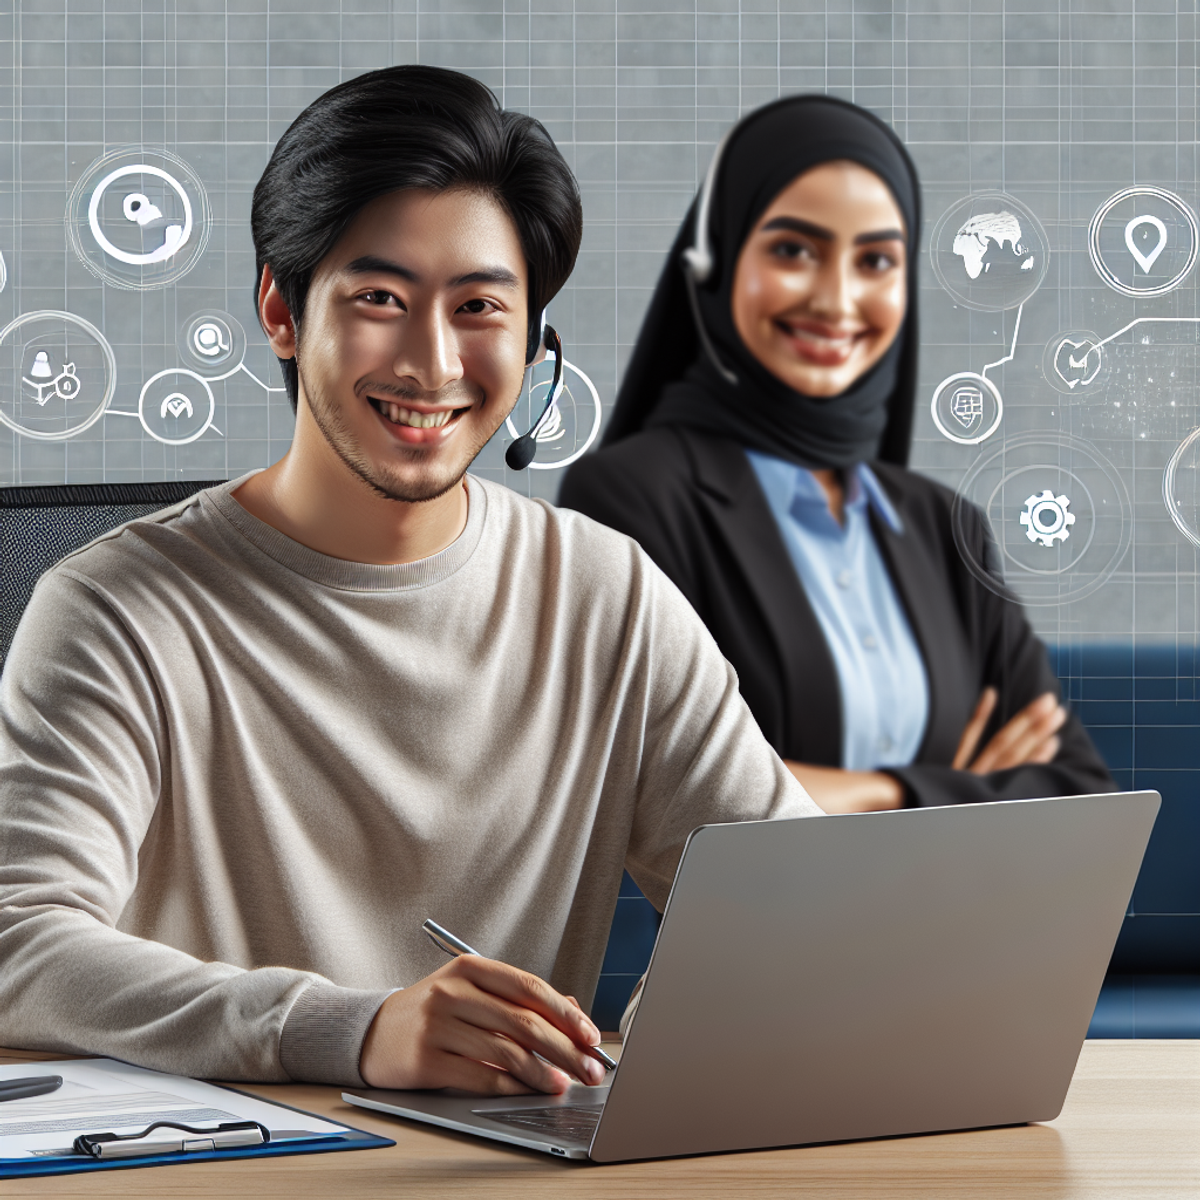 Asian male confidently filling out an online form on a laptop with diverse unspecific symbols on the screen, with a Middle Eastern female customer service representative in the background, smiling and portraying a welcoming atmosphere.